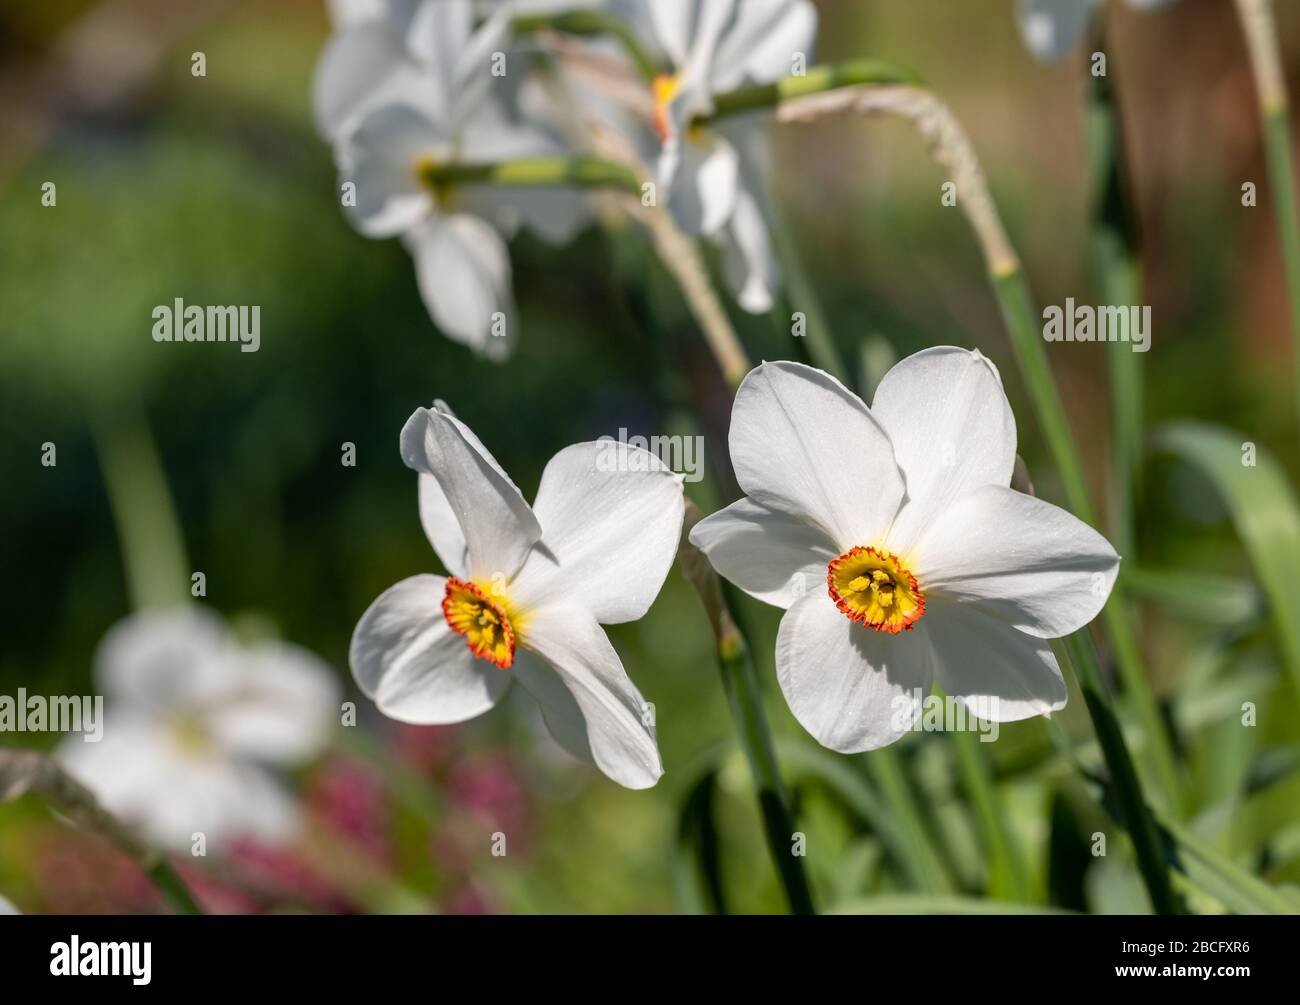 Spring flowers Narcissus poeticus, also called Poet's narcissus, at the historic walled garden in the Borough of Hillingdon, London, UK. Stock Photo